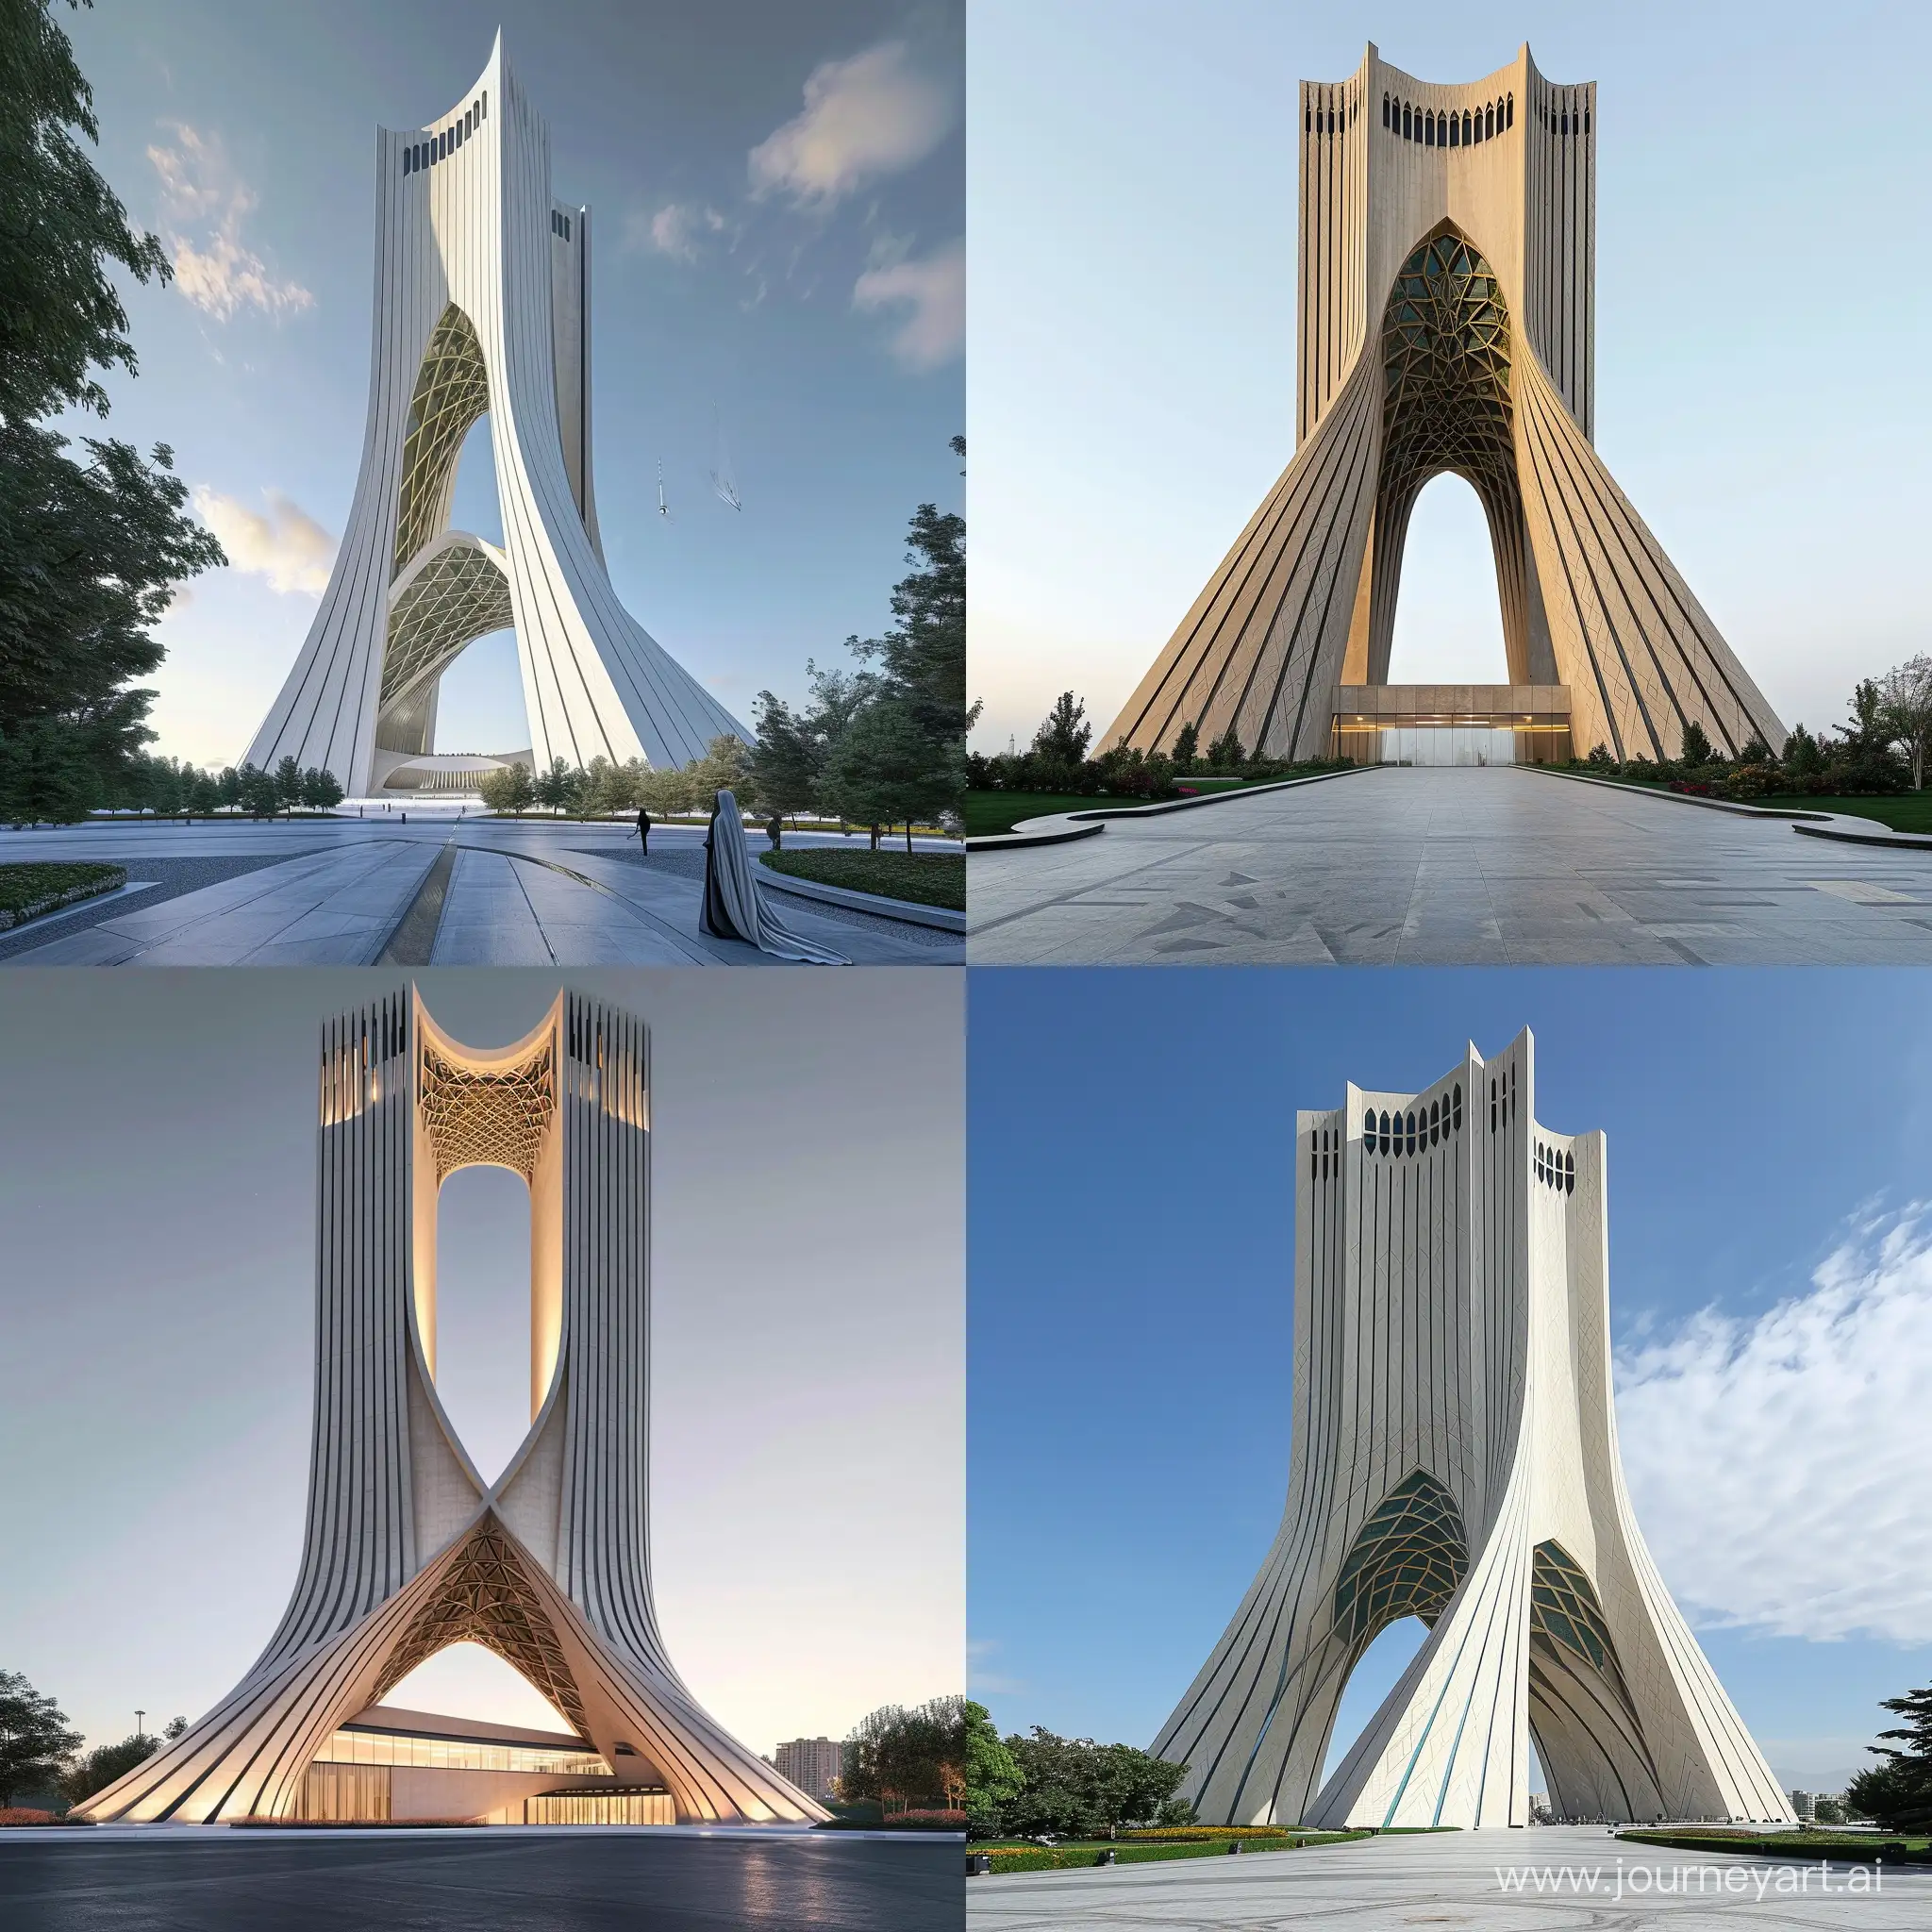 Iran's Freedom Tower with modern design